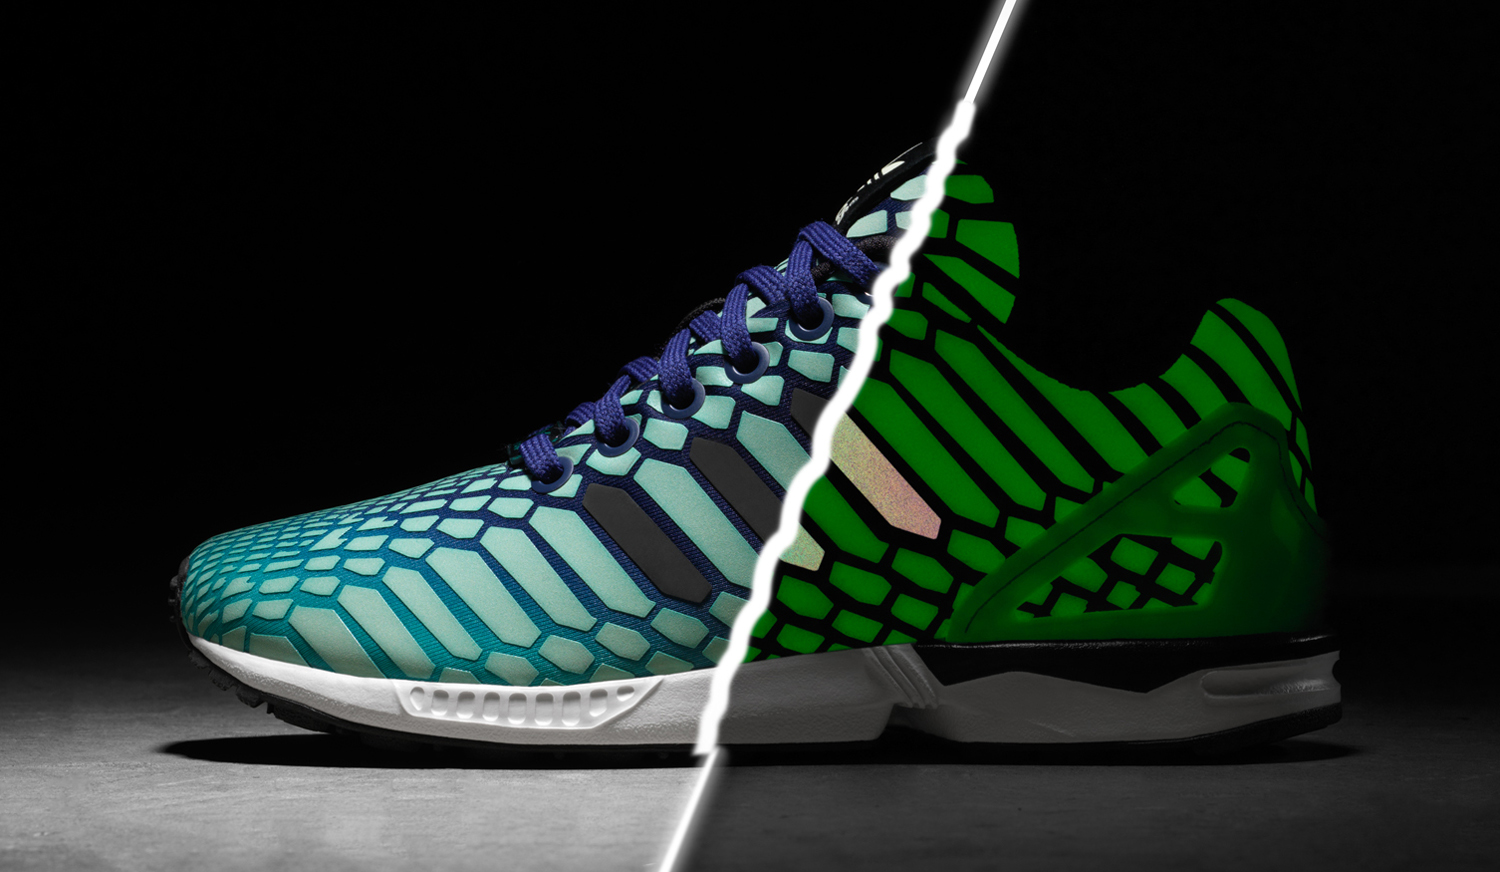 Adidas Lights Up AllStar Weekend With Glow in the Dark